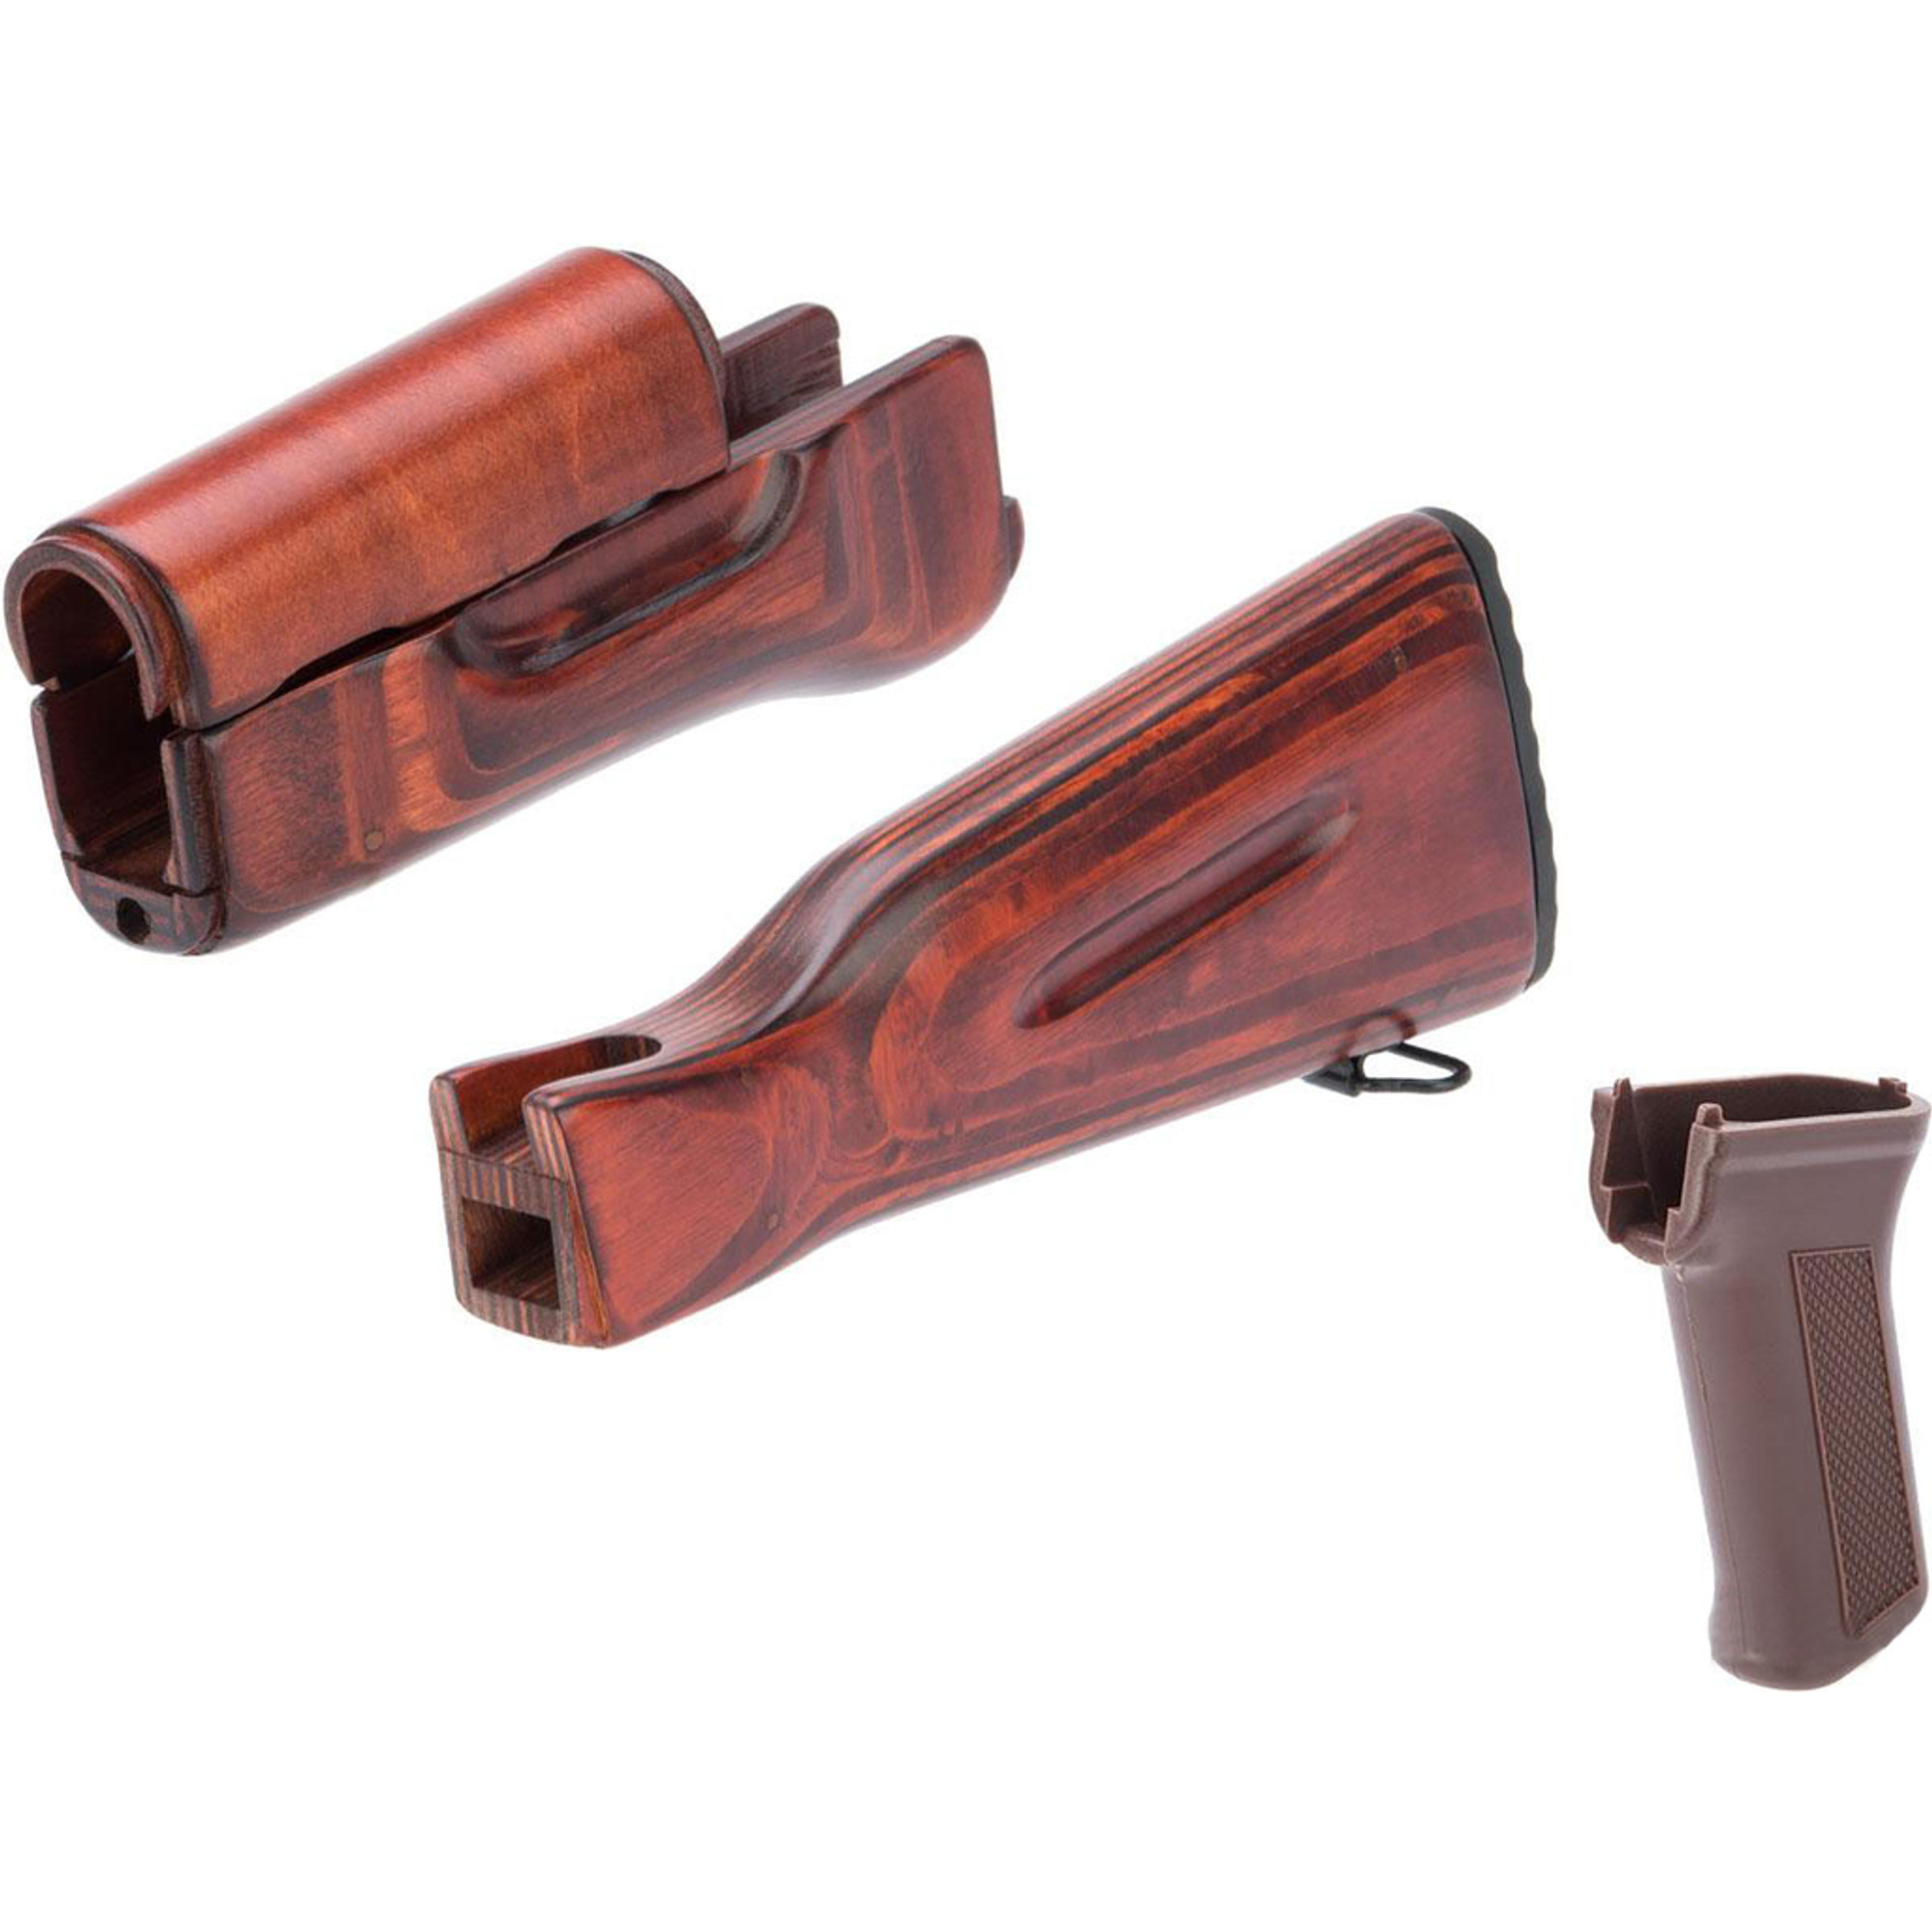 LCT Airsoft Wooden Stock and Grip Set for LCK74 Series Airsoft Rifles